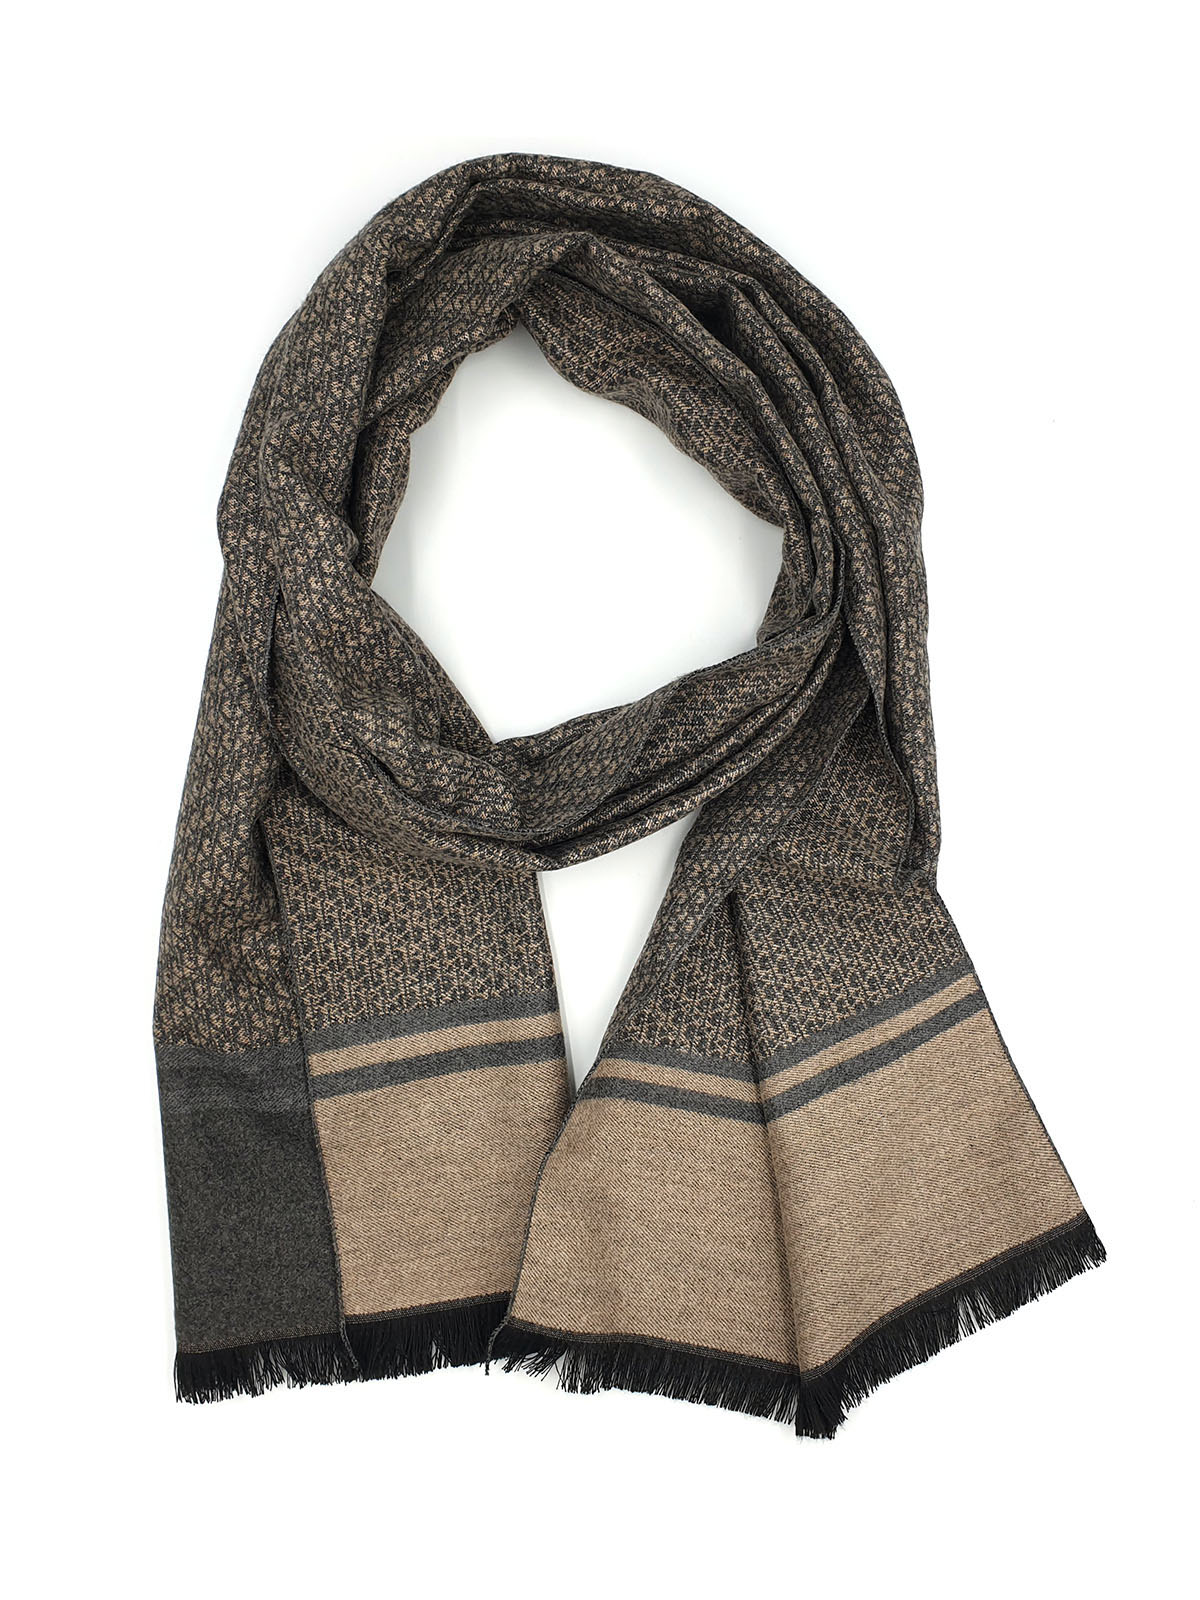 Gray and beige patterned scarf - 10324 - € 19.68 img3